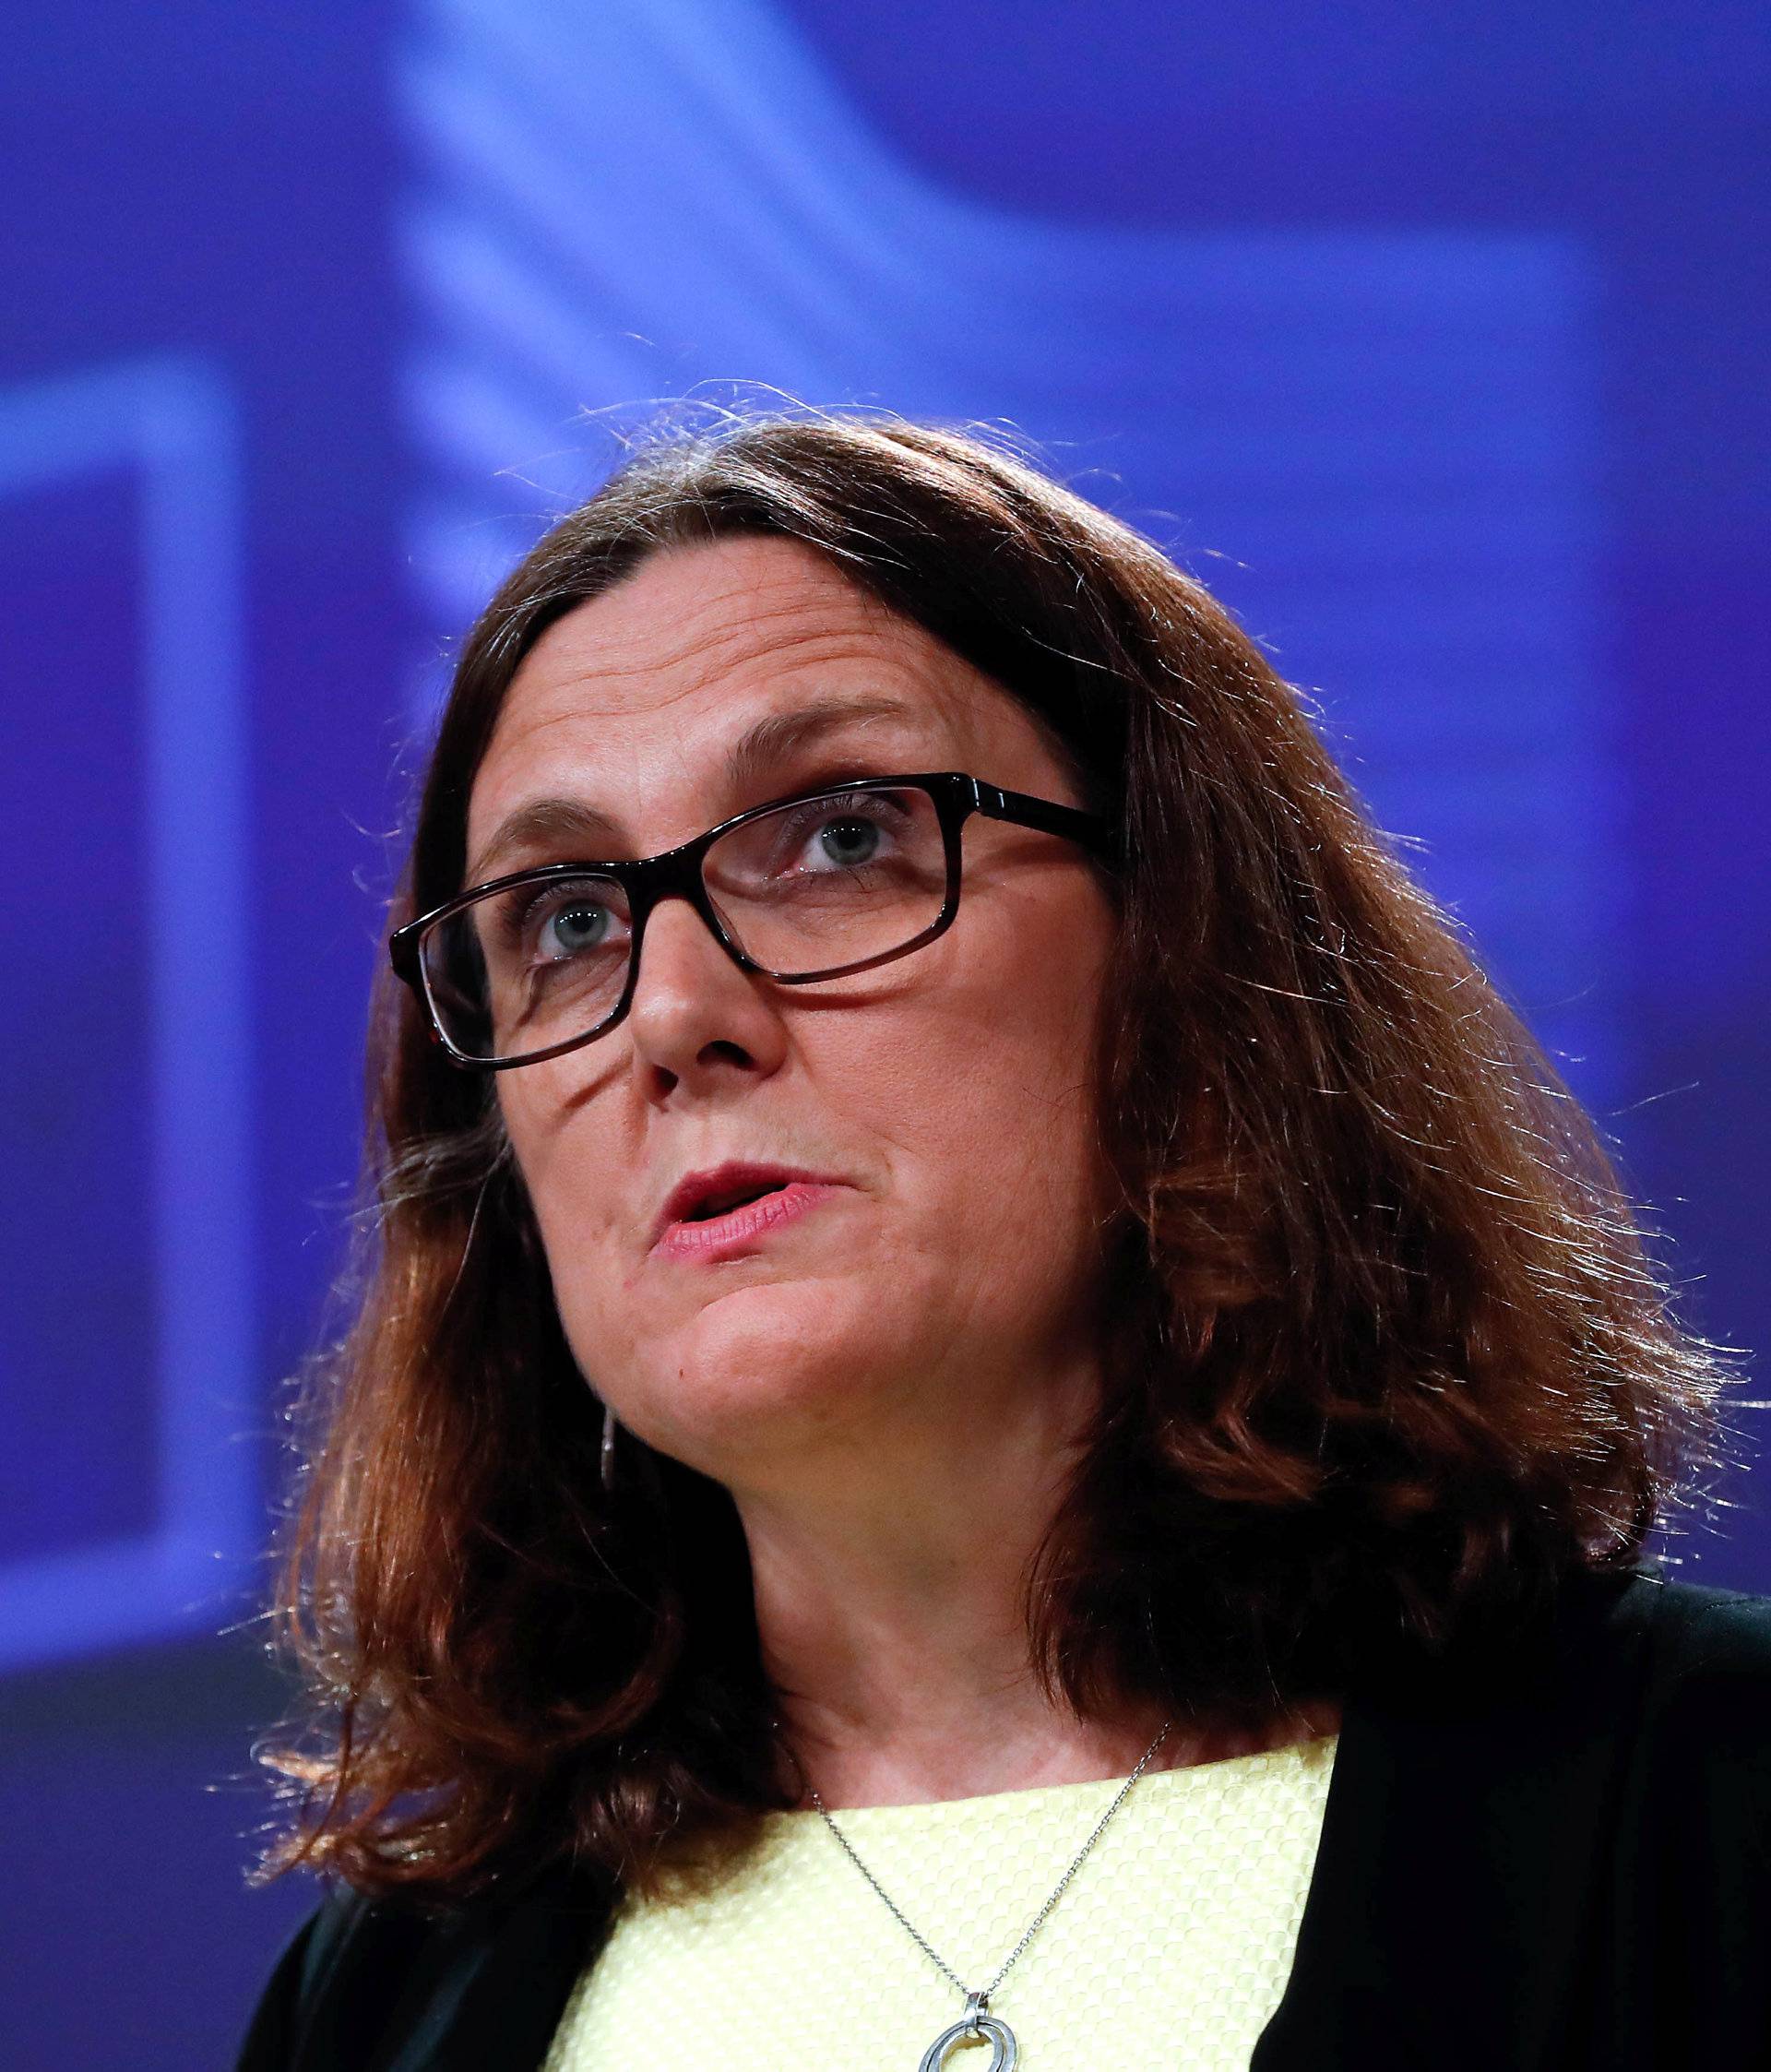 European Trade Commissioner Malmstroem holds a news conference following the United States announcement  to impose tariffs on steel and aluminium from the European Union, in Brussels